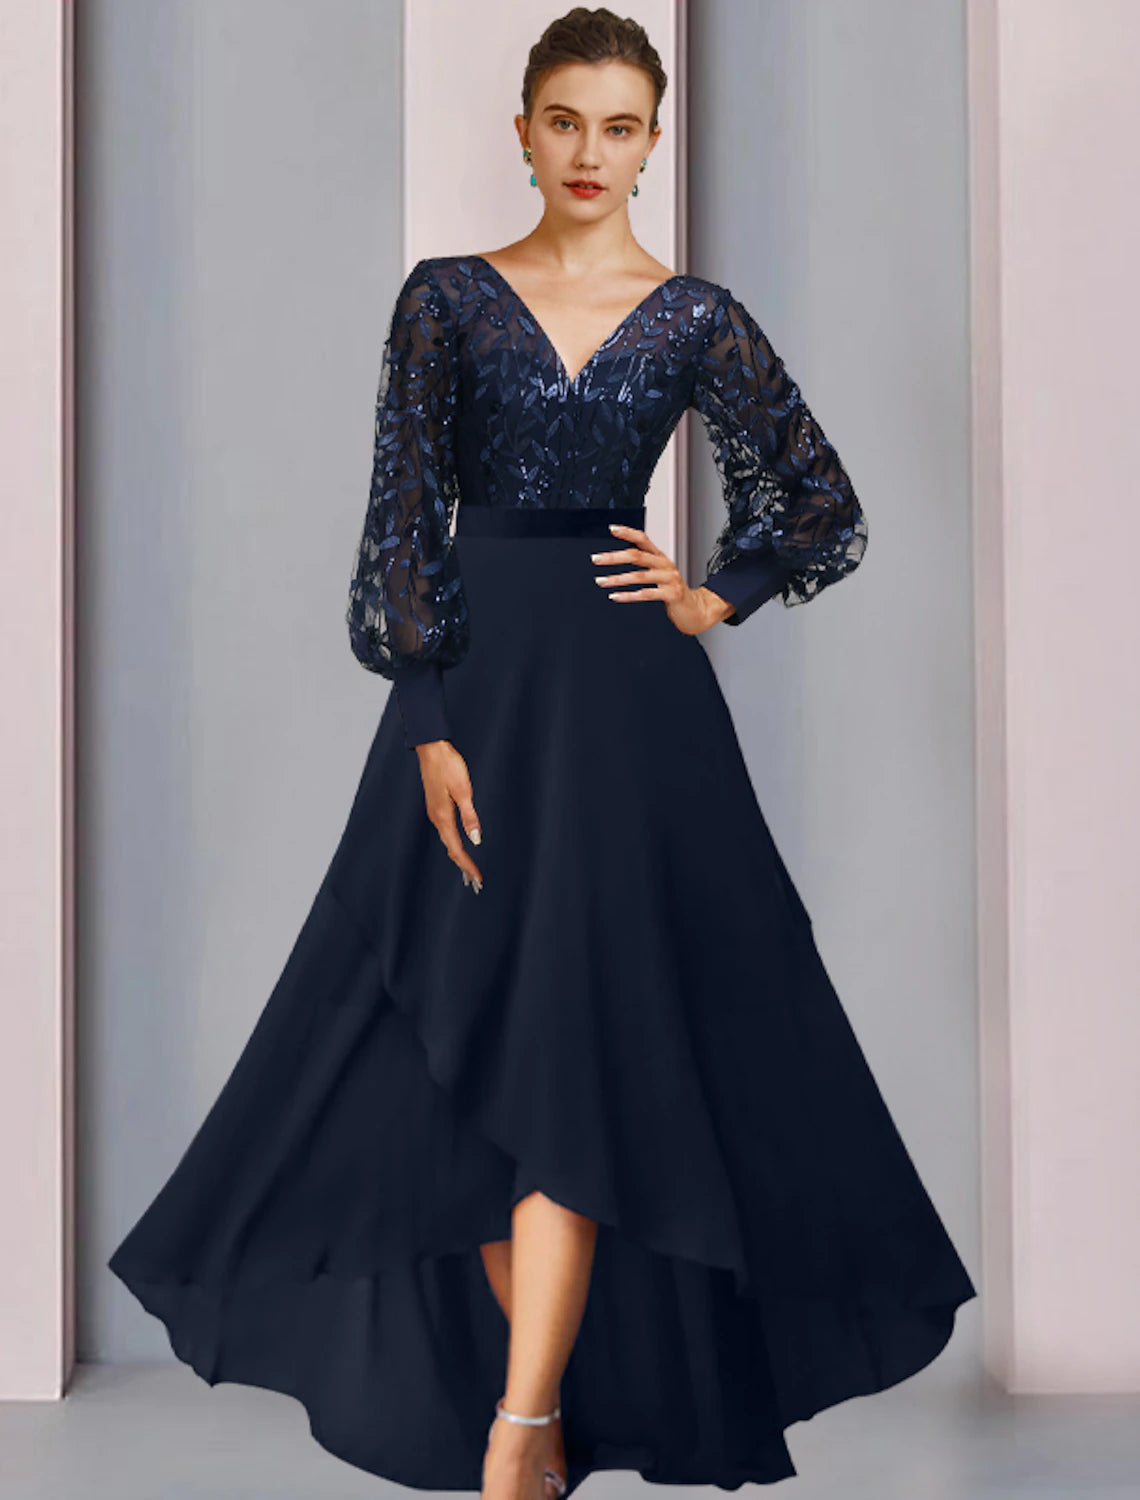 A-Line Mother of the Bride Dress Wedding Guest Sparkle & Shine High Low Jewel Neck Asymmetrical Tea Length Chiffon Lace Sequined Long Sleeve with Sequin Appliques Fall